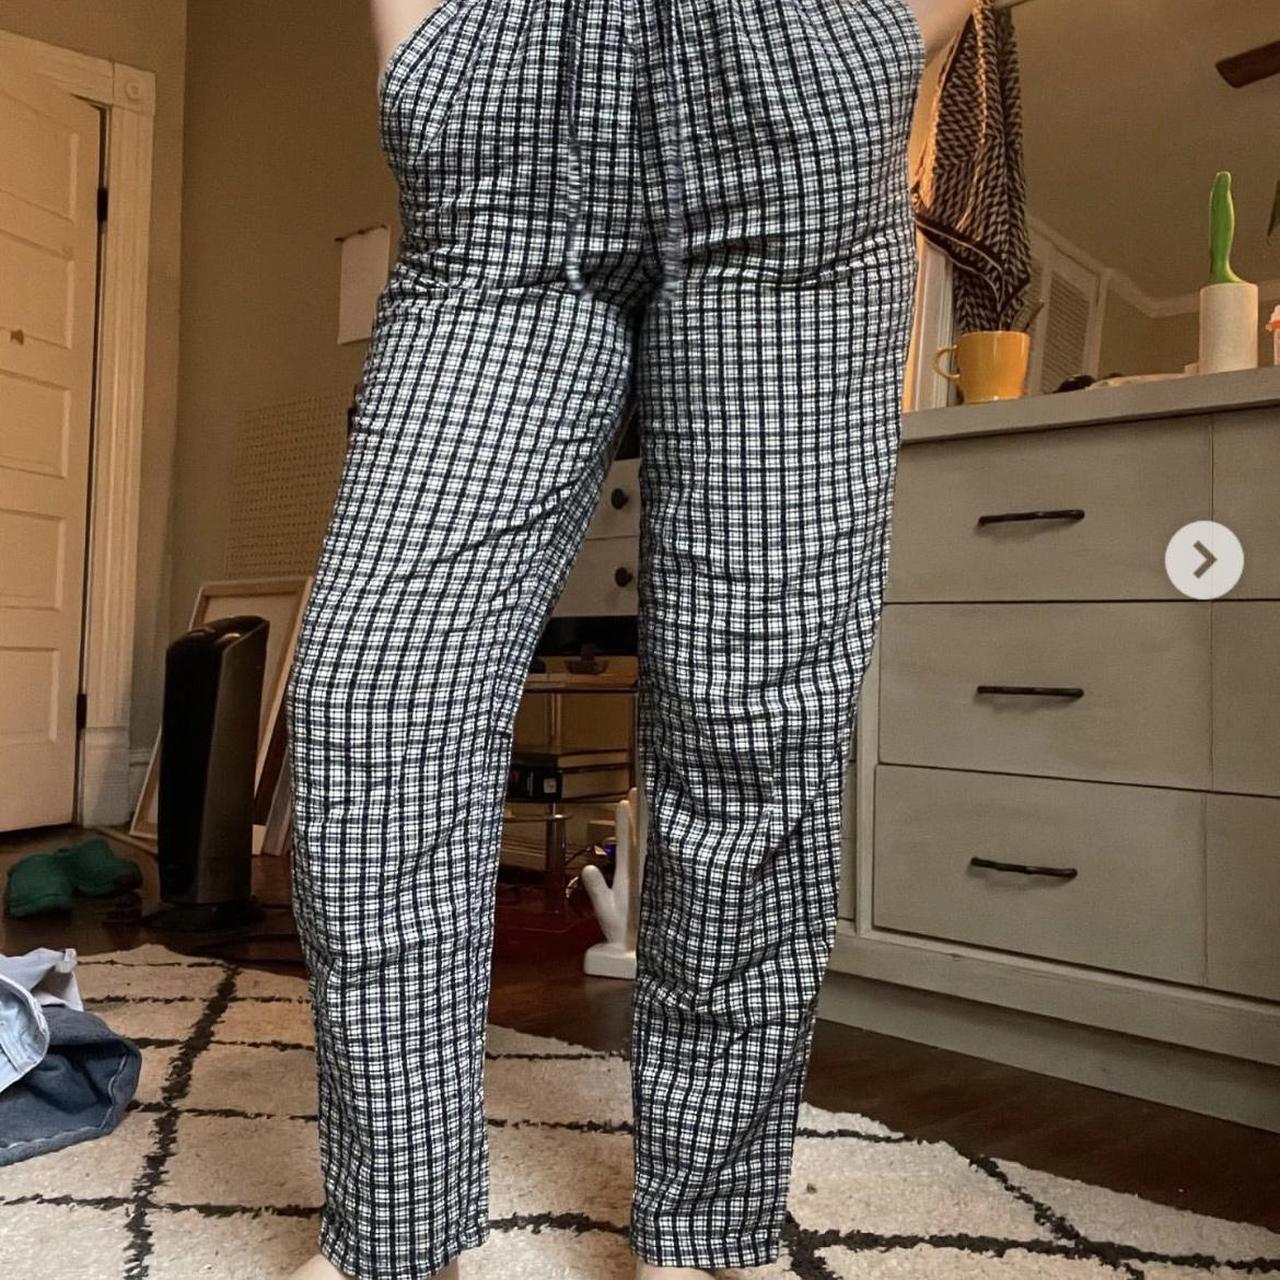 white and grey plaid pajama pants - in perfect - Depop